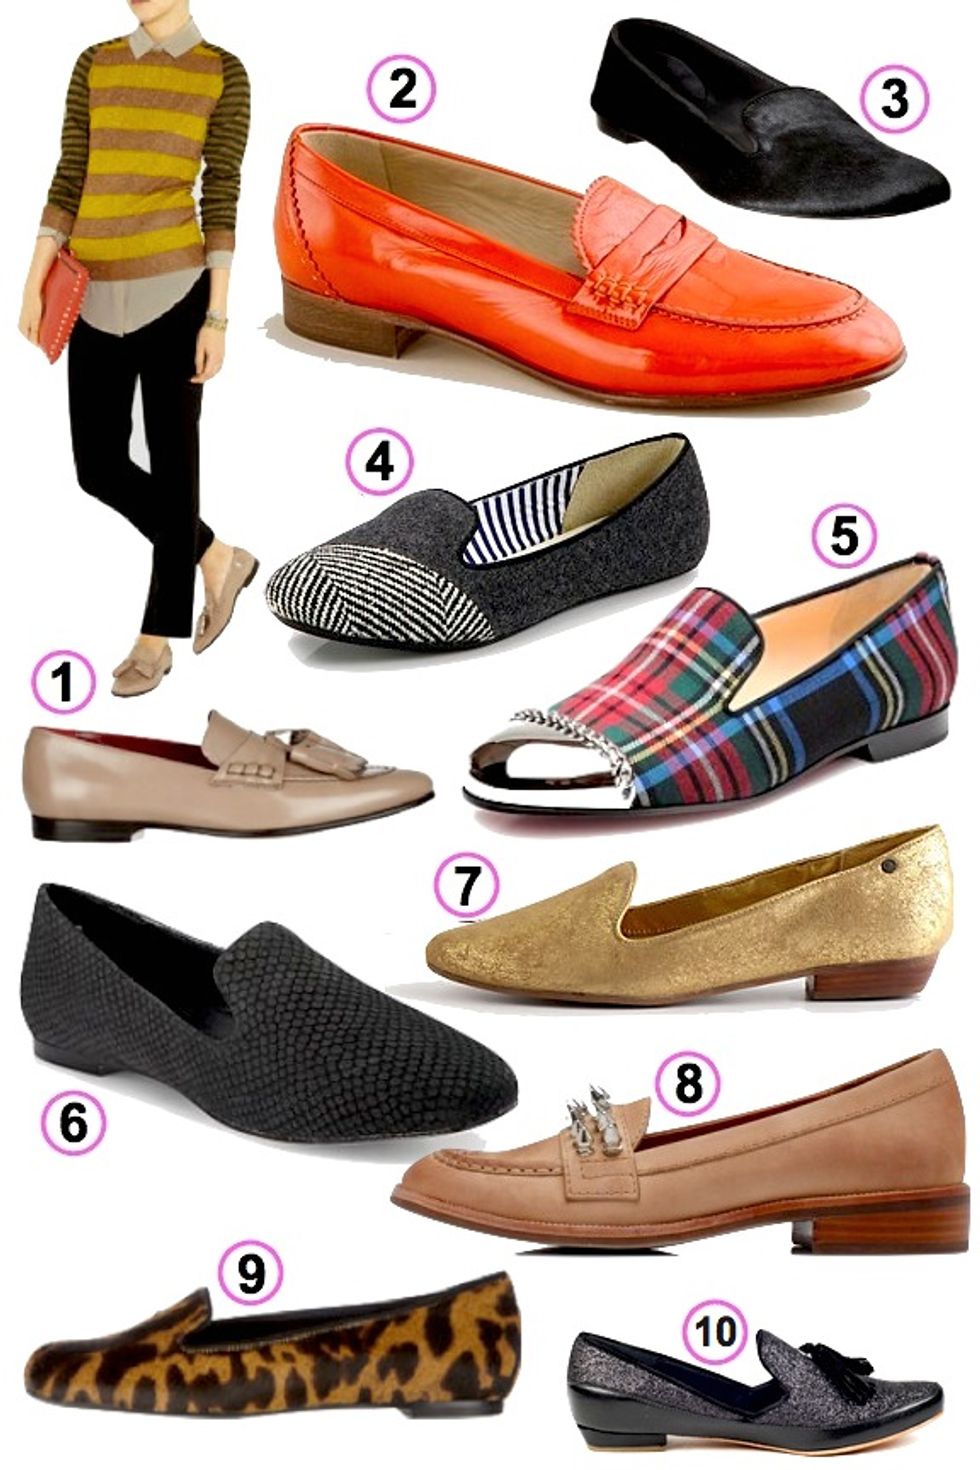 Women's Look of the Week: 10 Bold Loafers for Bay City Walking